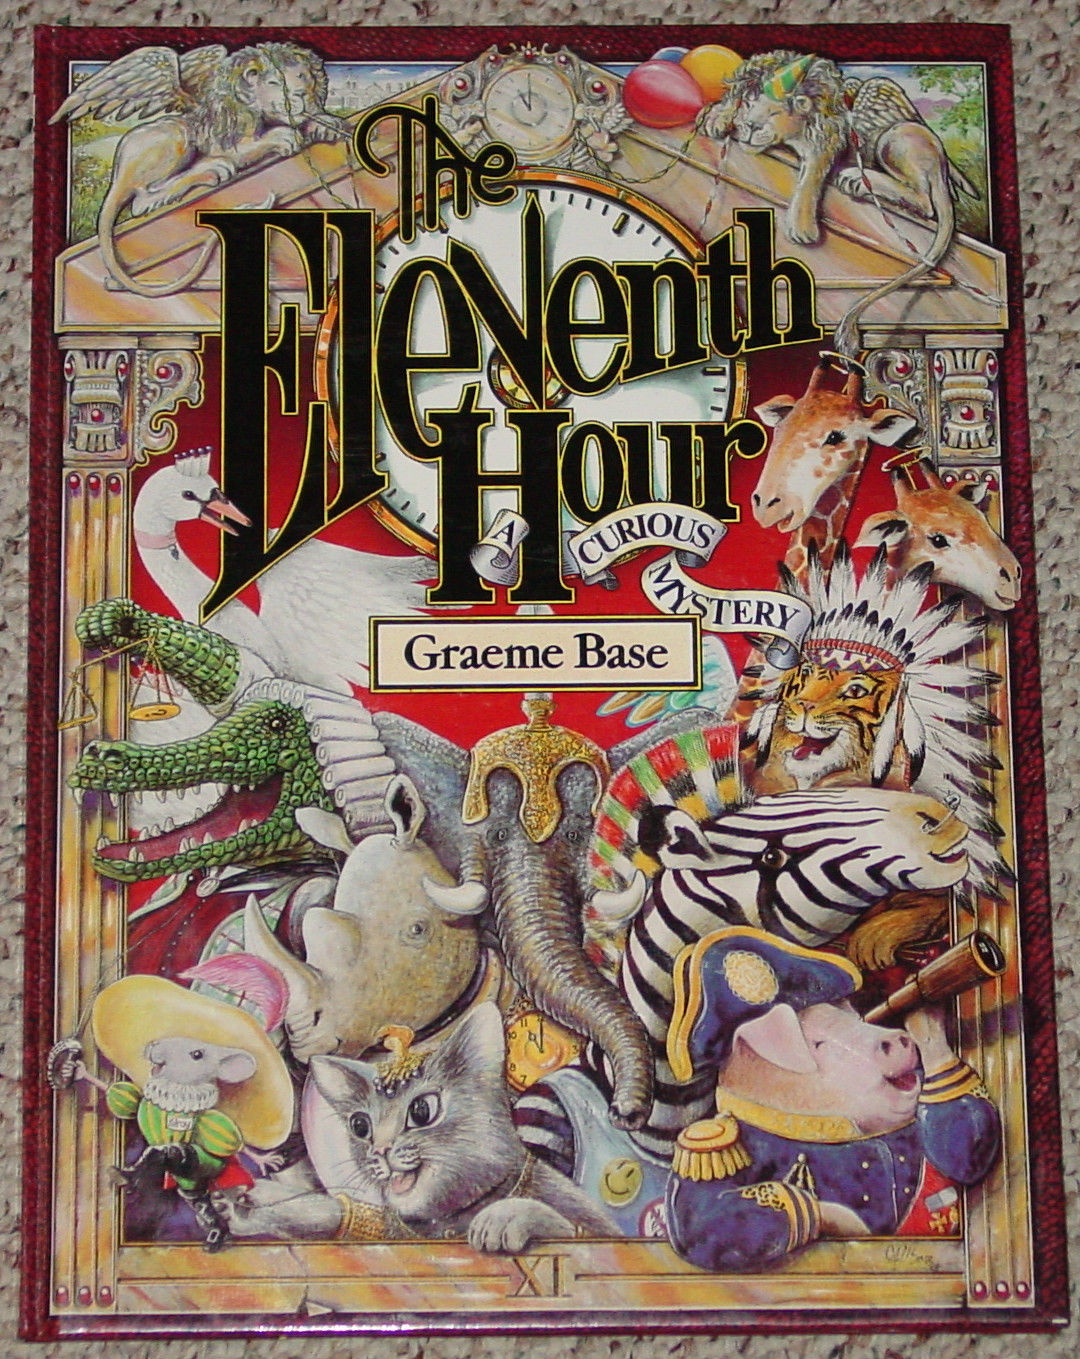 Primary image for BOOK ELEVENTH HOUR BOOK CURIOUS MYSTERY BY GRAEME BASE 1989 SCHOLASTIC CLUB